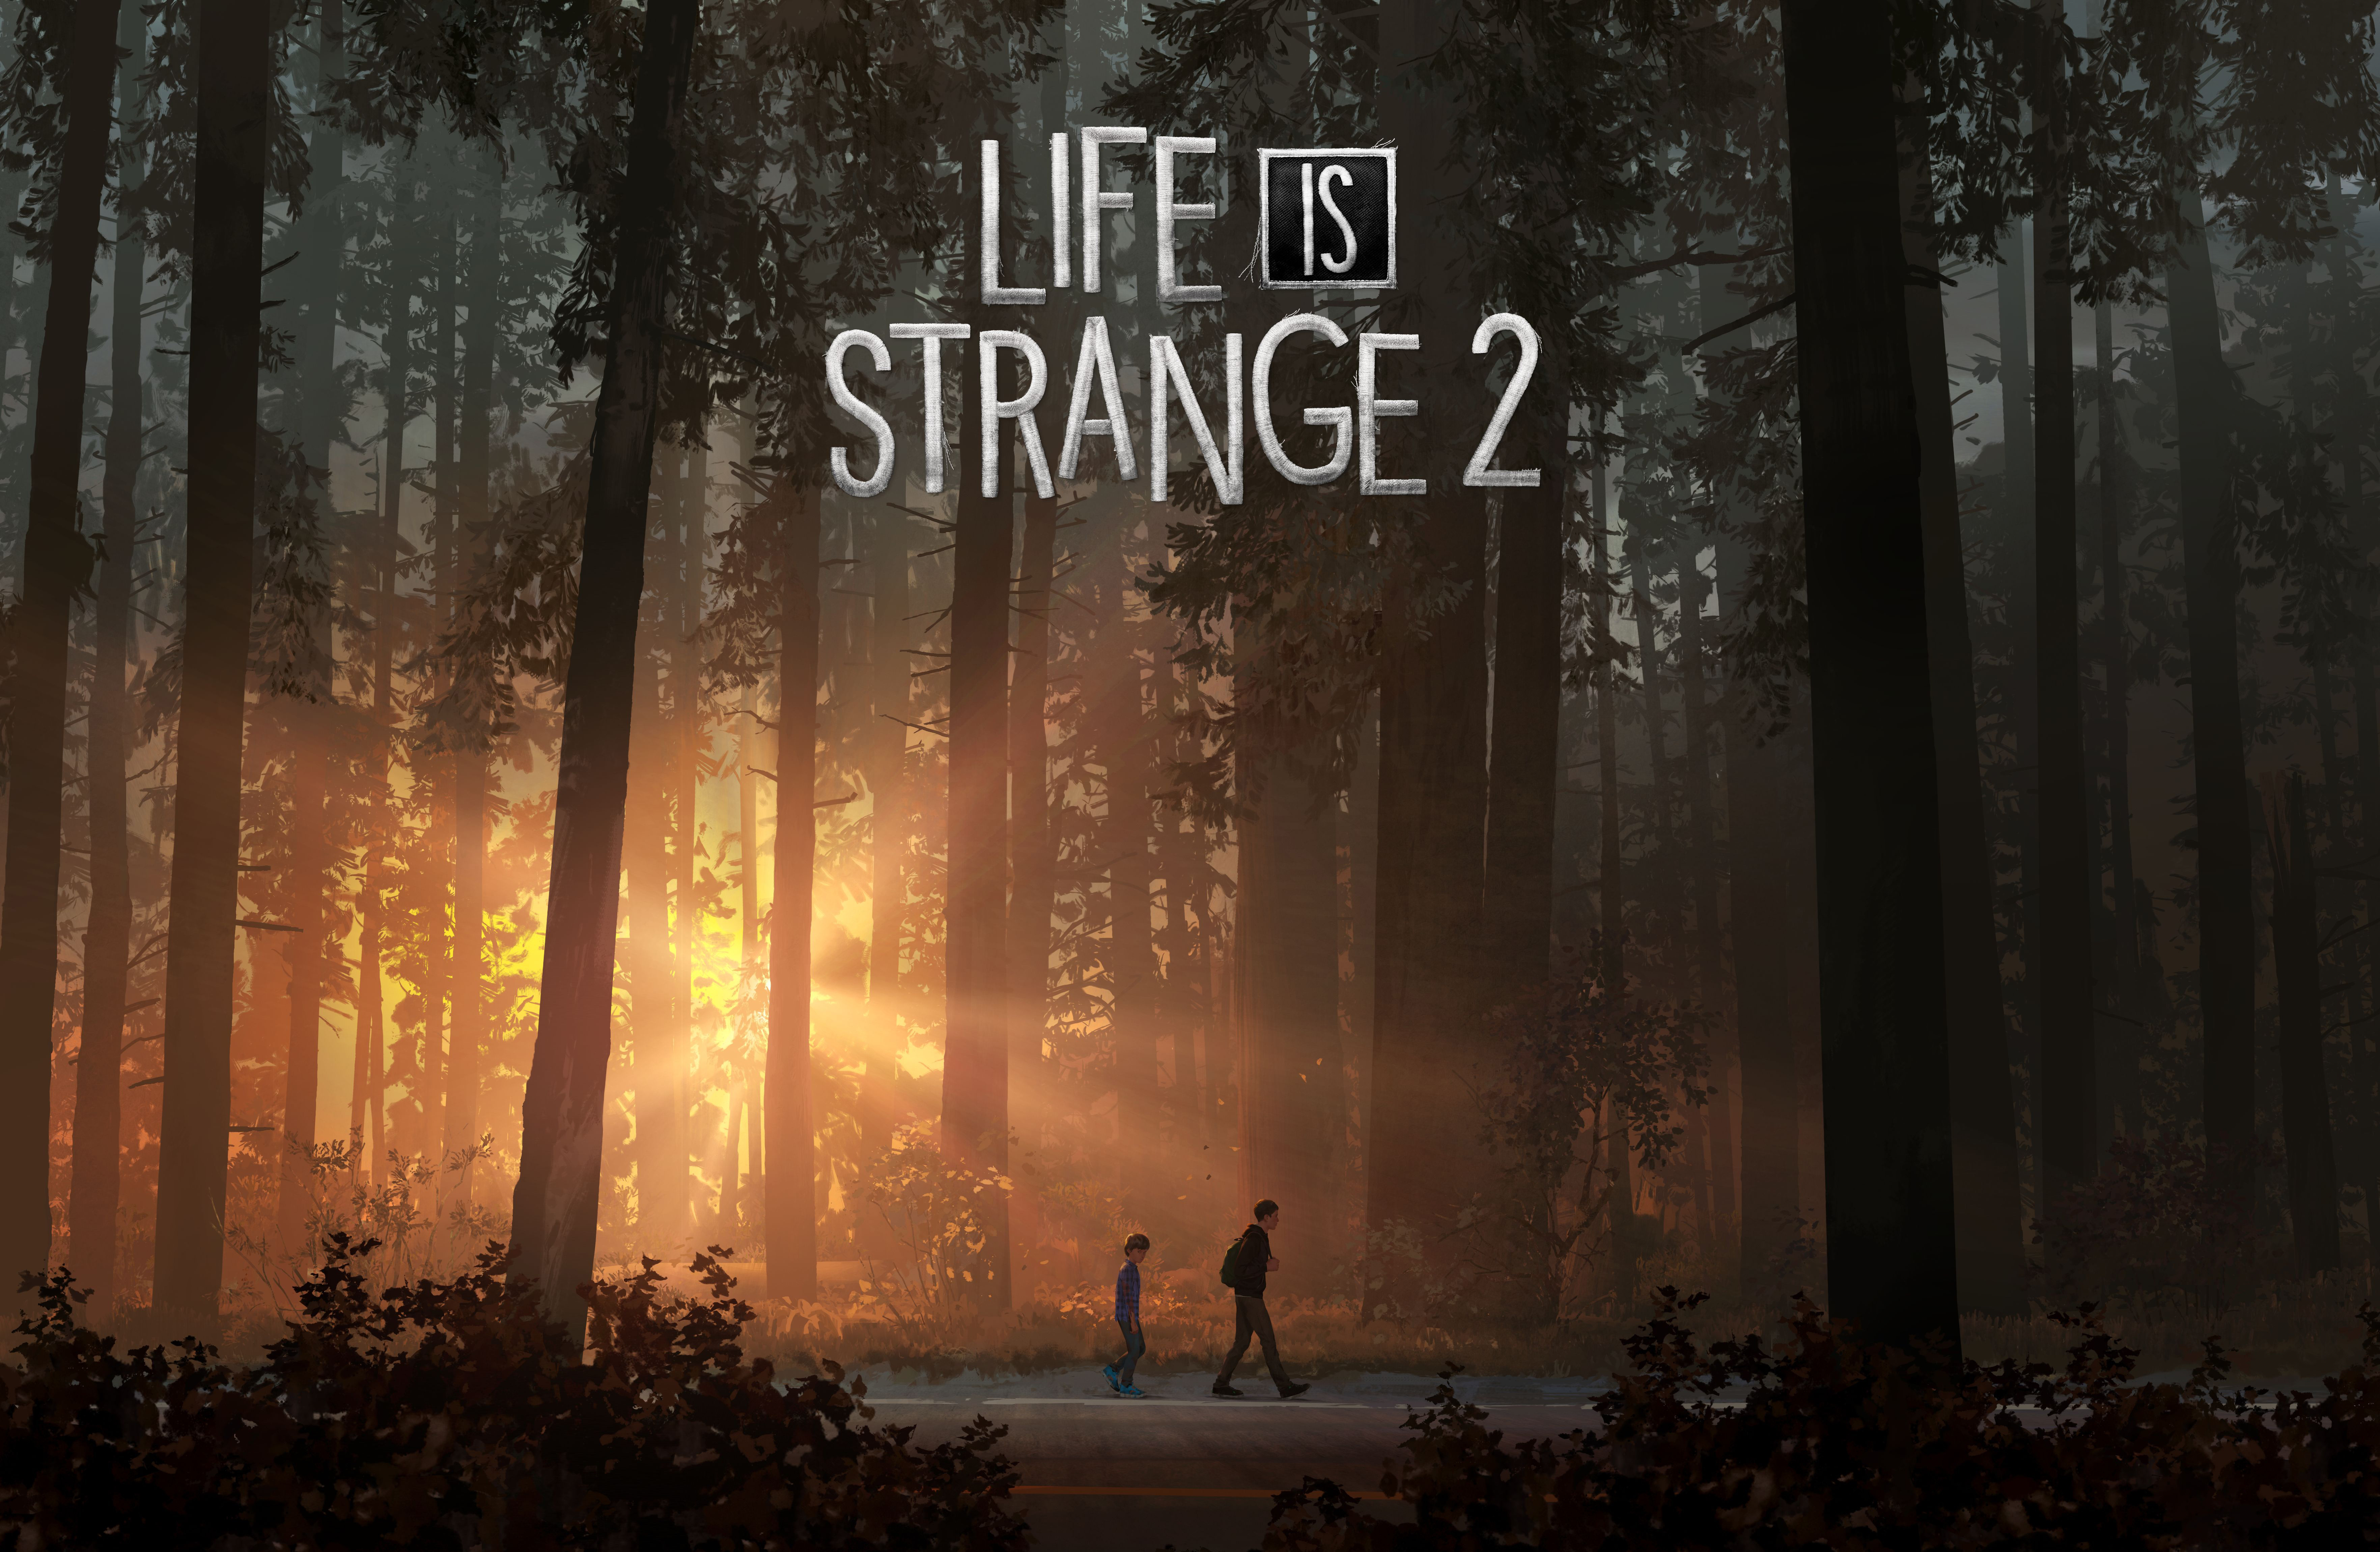 Sensing is life. Шон Диас Life is Strange 2. Life is Strange 2 лес. Life is Strange 2 1 эпизод. Into the Woods Life is Strange 2.